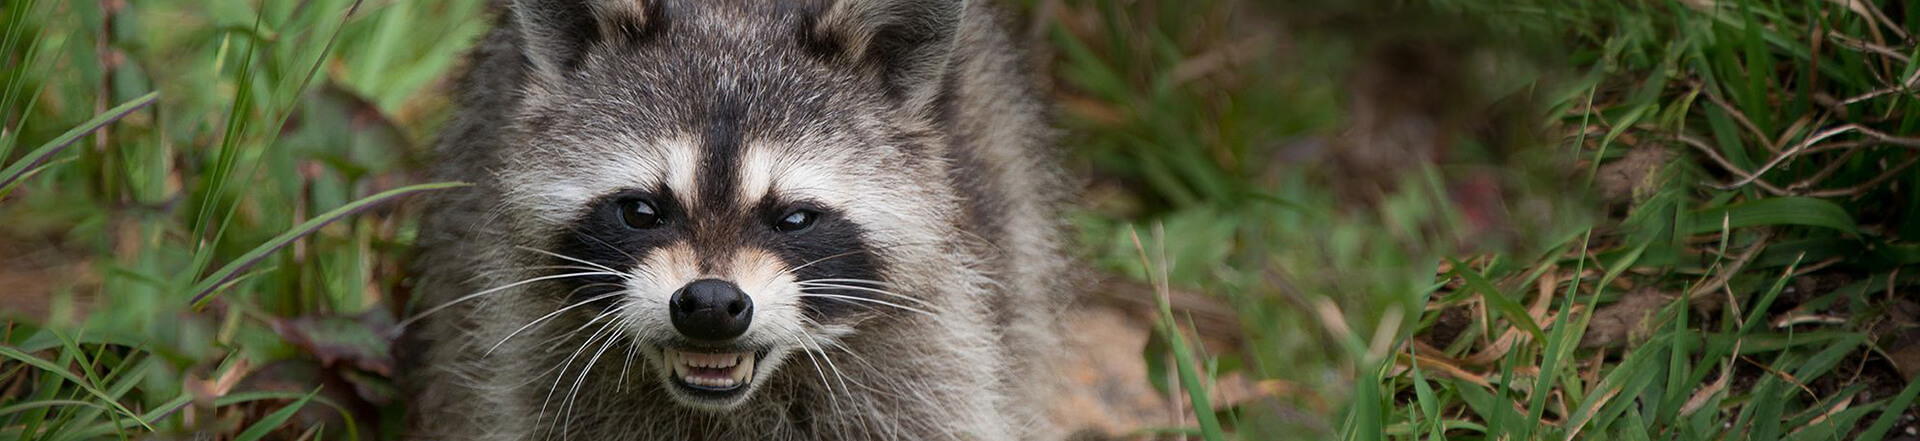 Raccoon Control Services Vancouver, Surrey and Burnaby